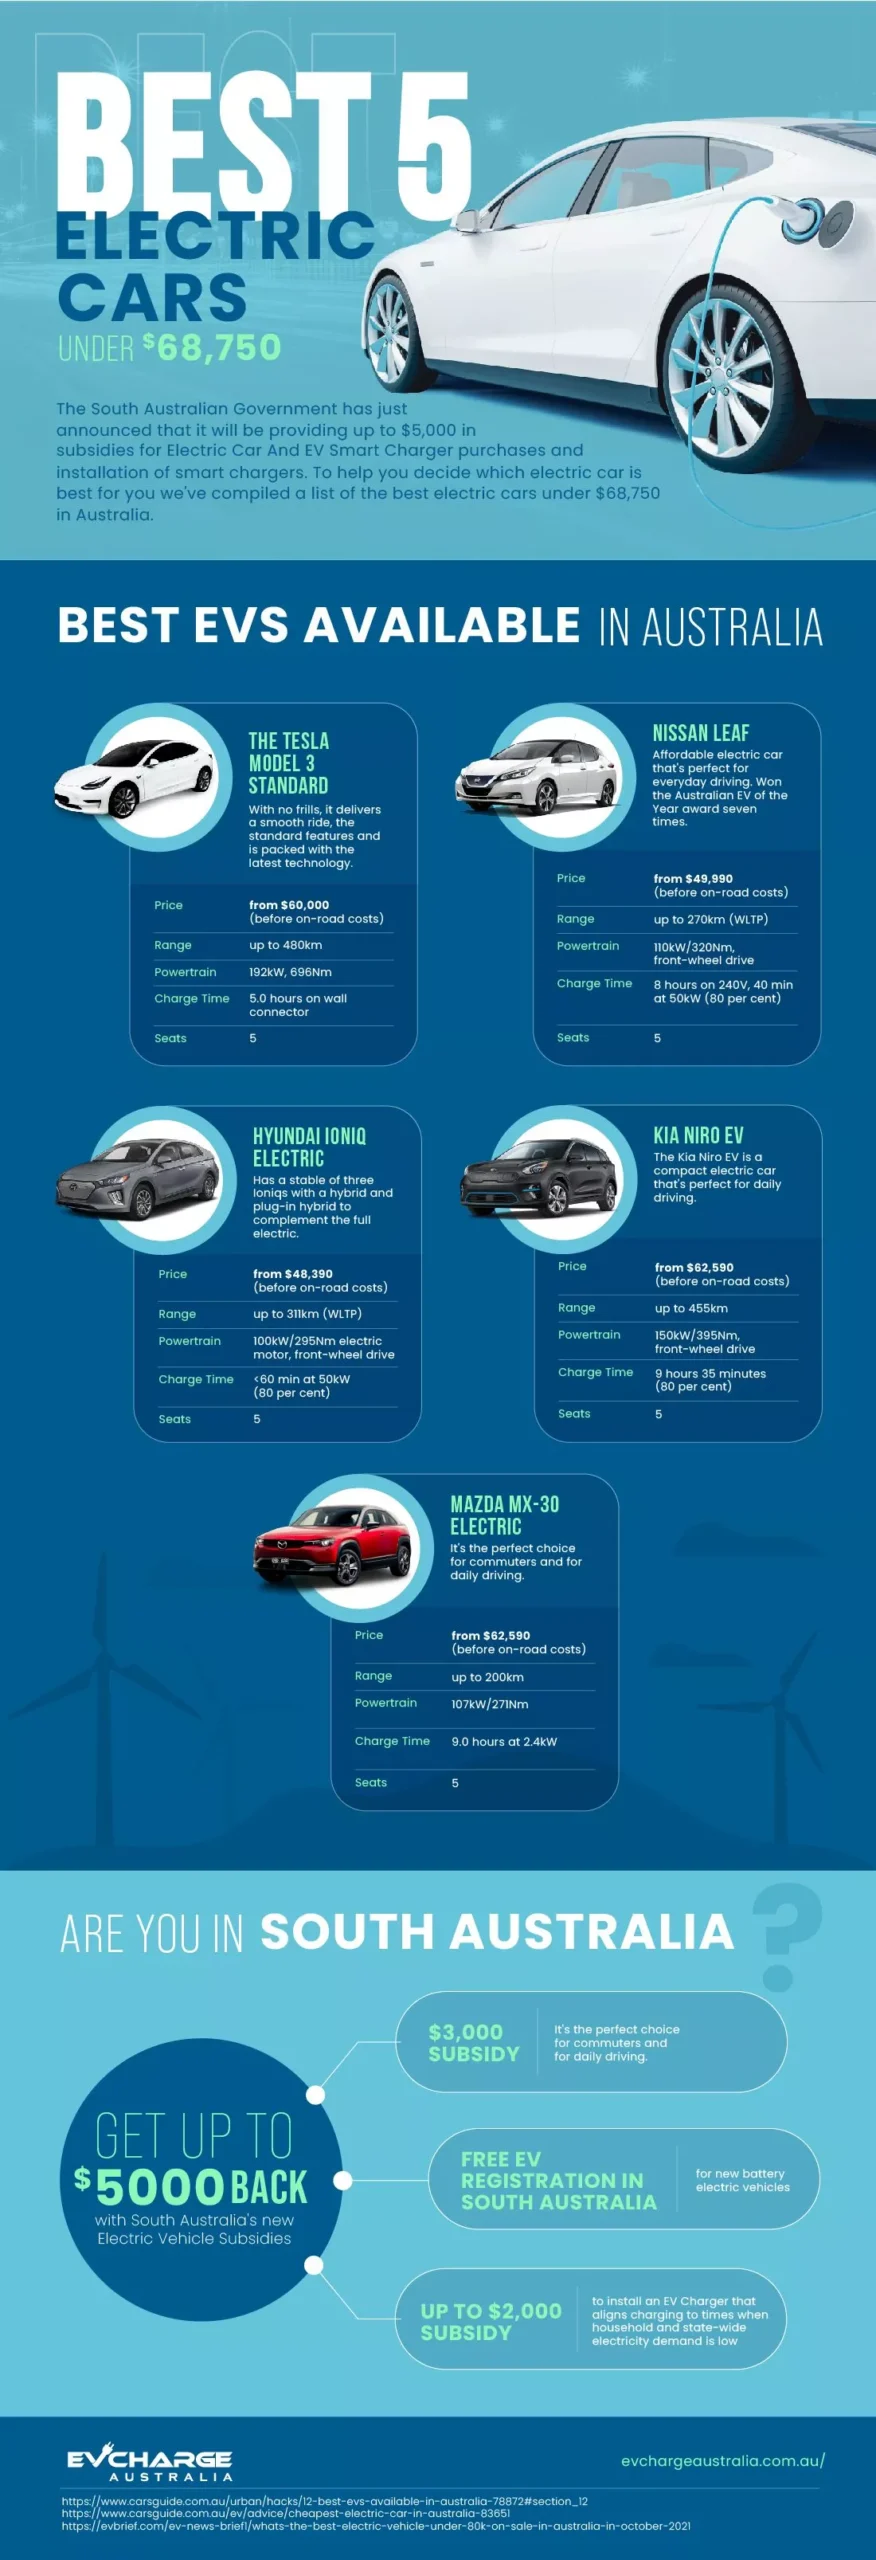 The Best 5 Electric Cars under $68,750 (InfoGraphic)